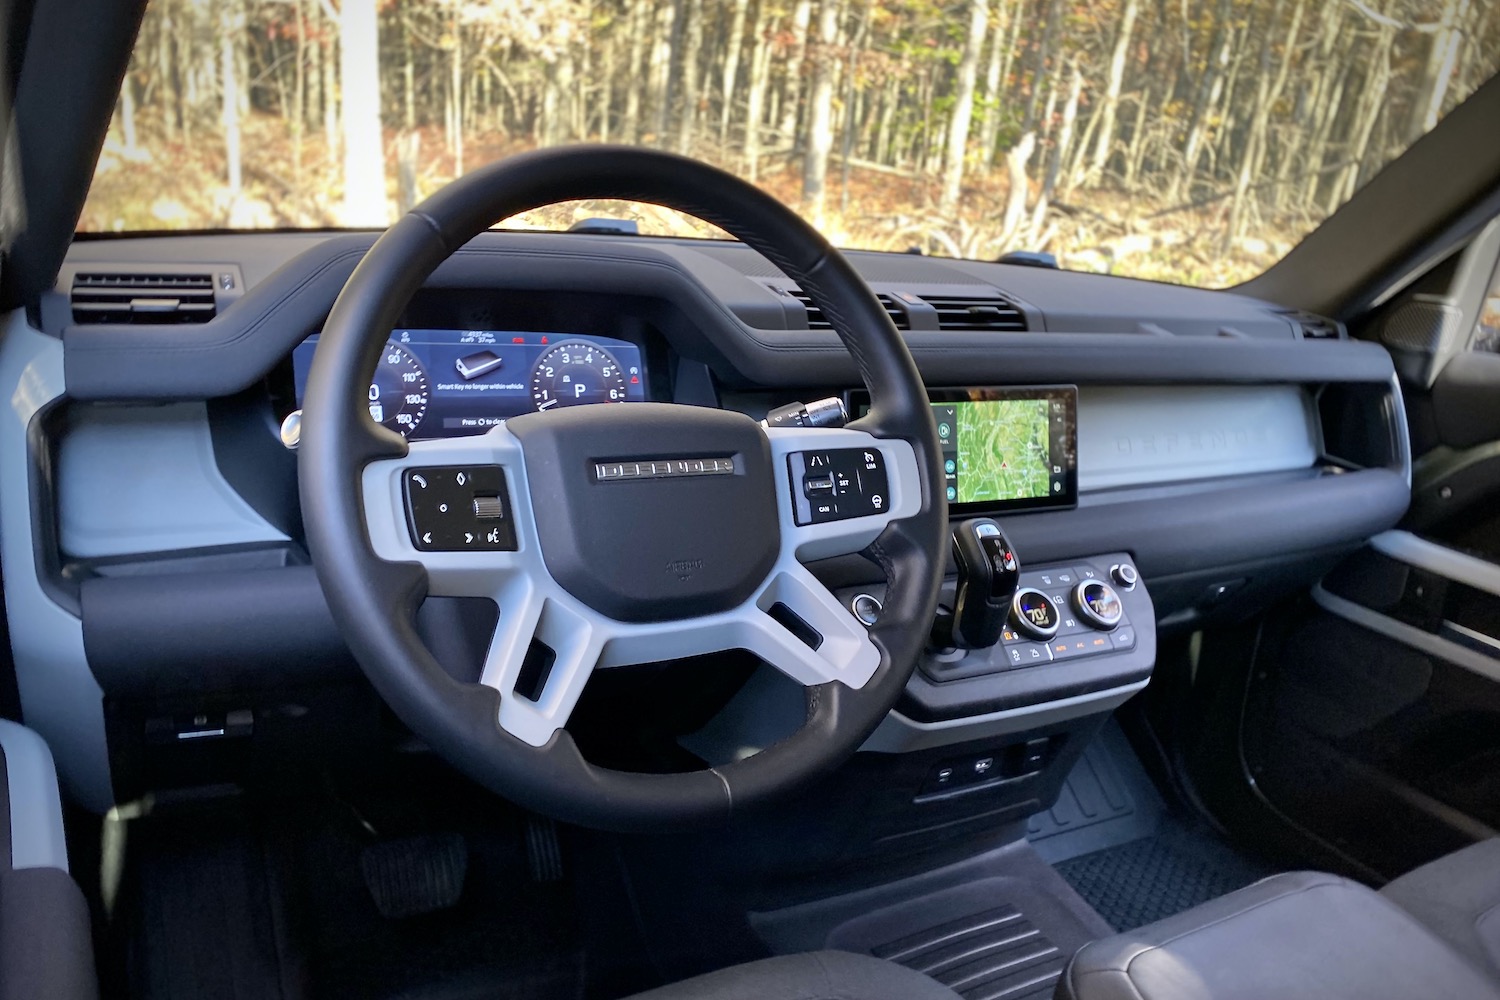 Land Rover Defender dashboard from driver's side with trees in the background.